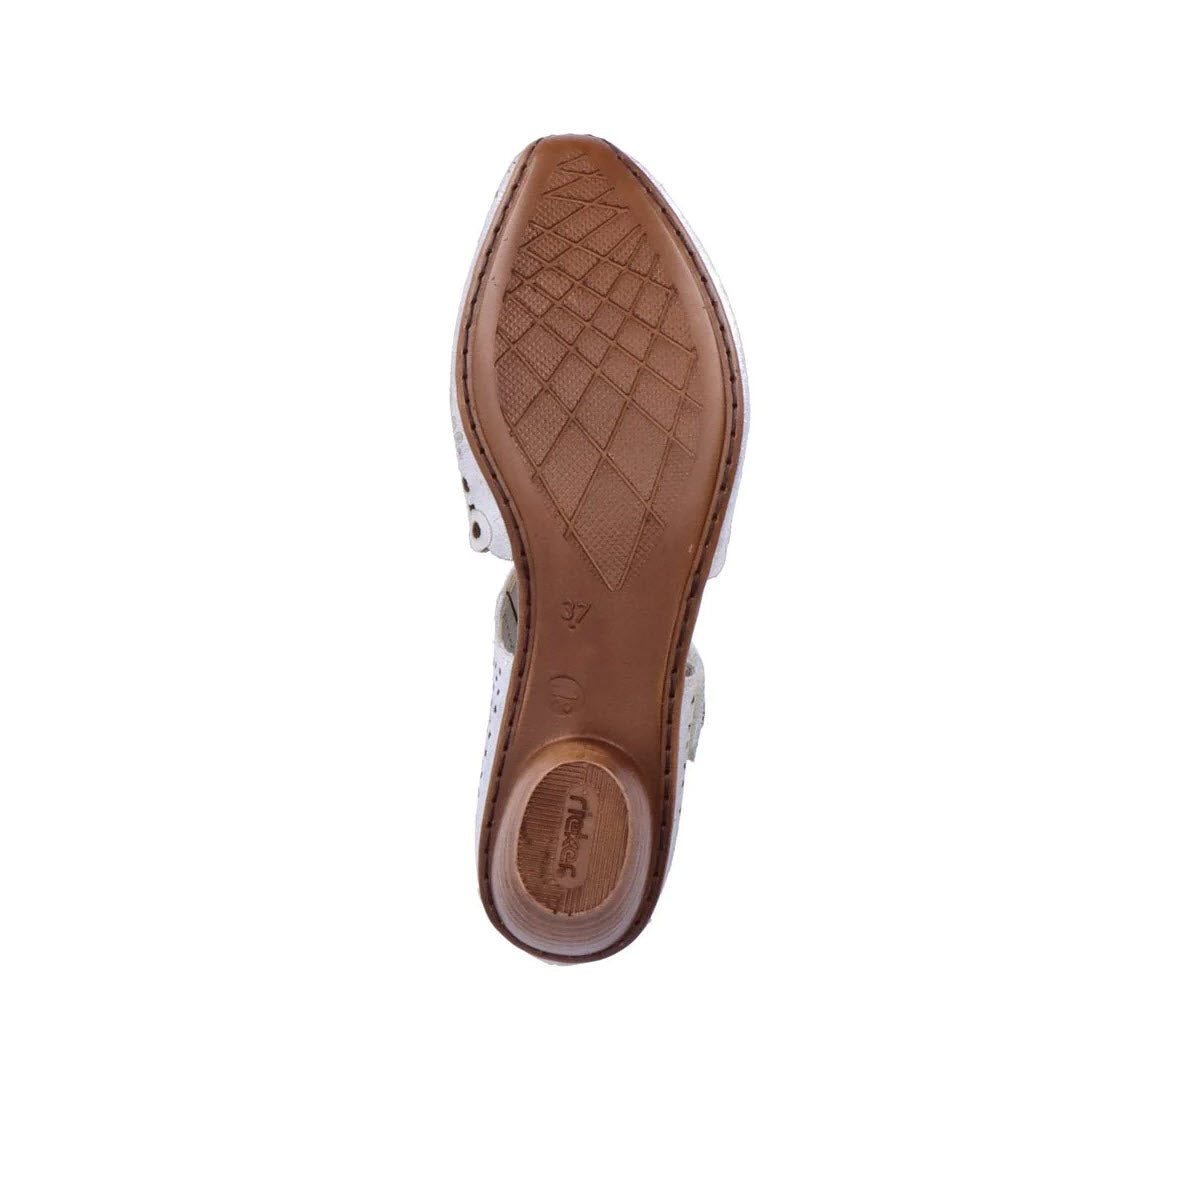 Bottom view of a brown leather Rieker Women&#39;s RIEKER PERFED MARY JANE KITTEN HEEL SILVER showing the textured sole and size marking.